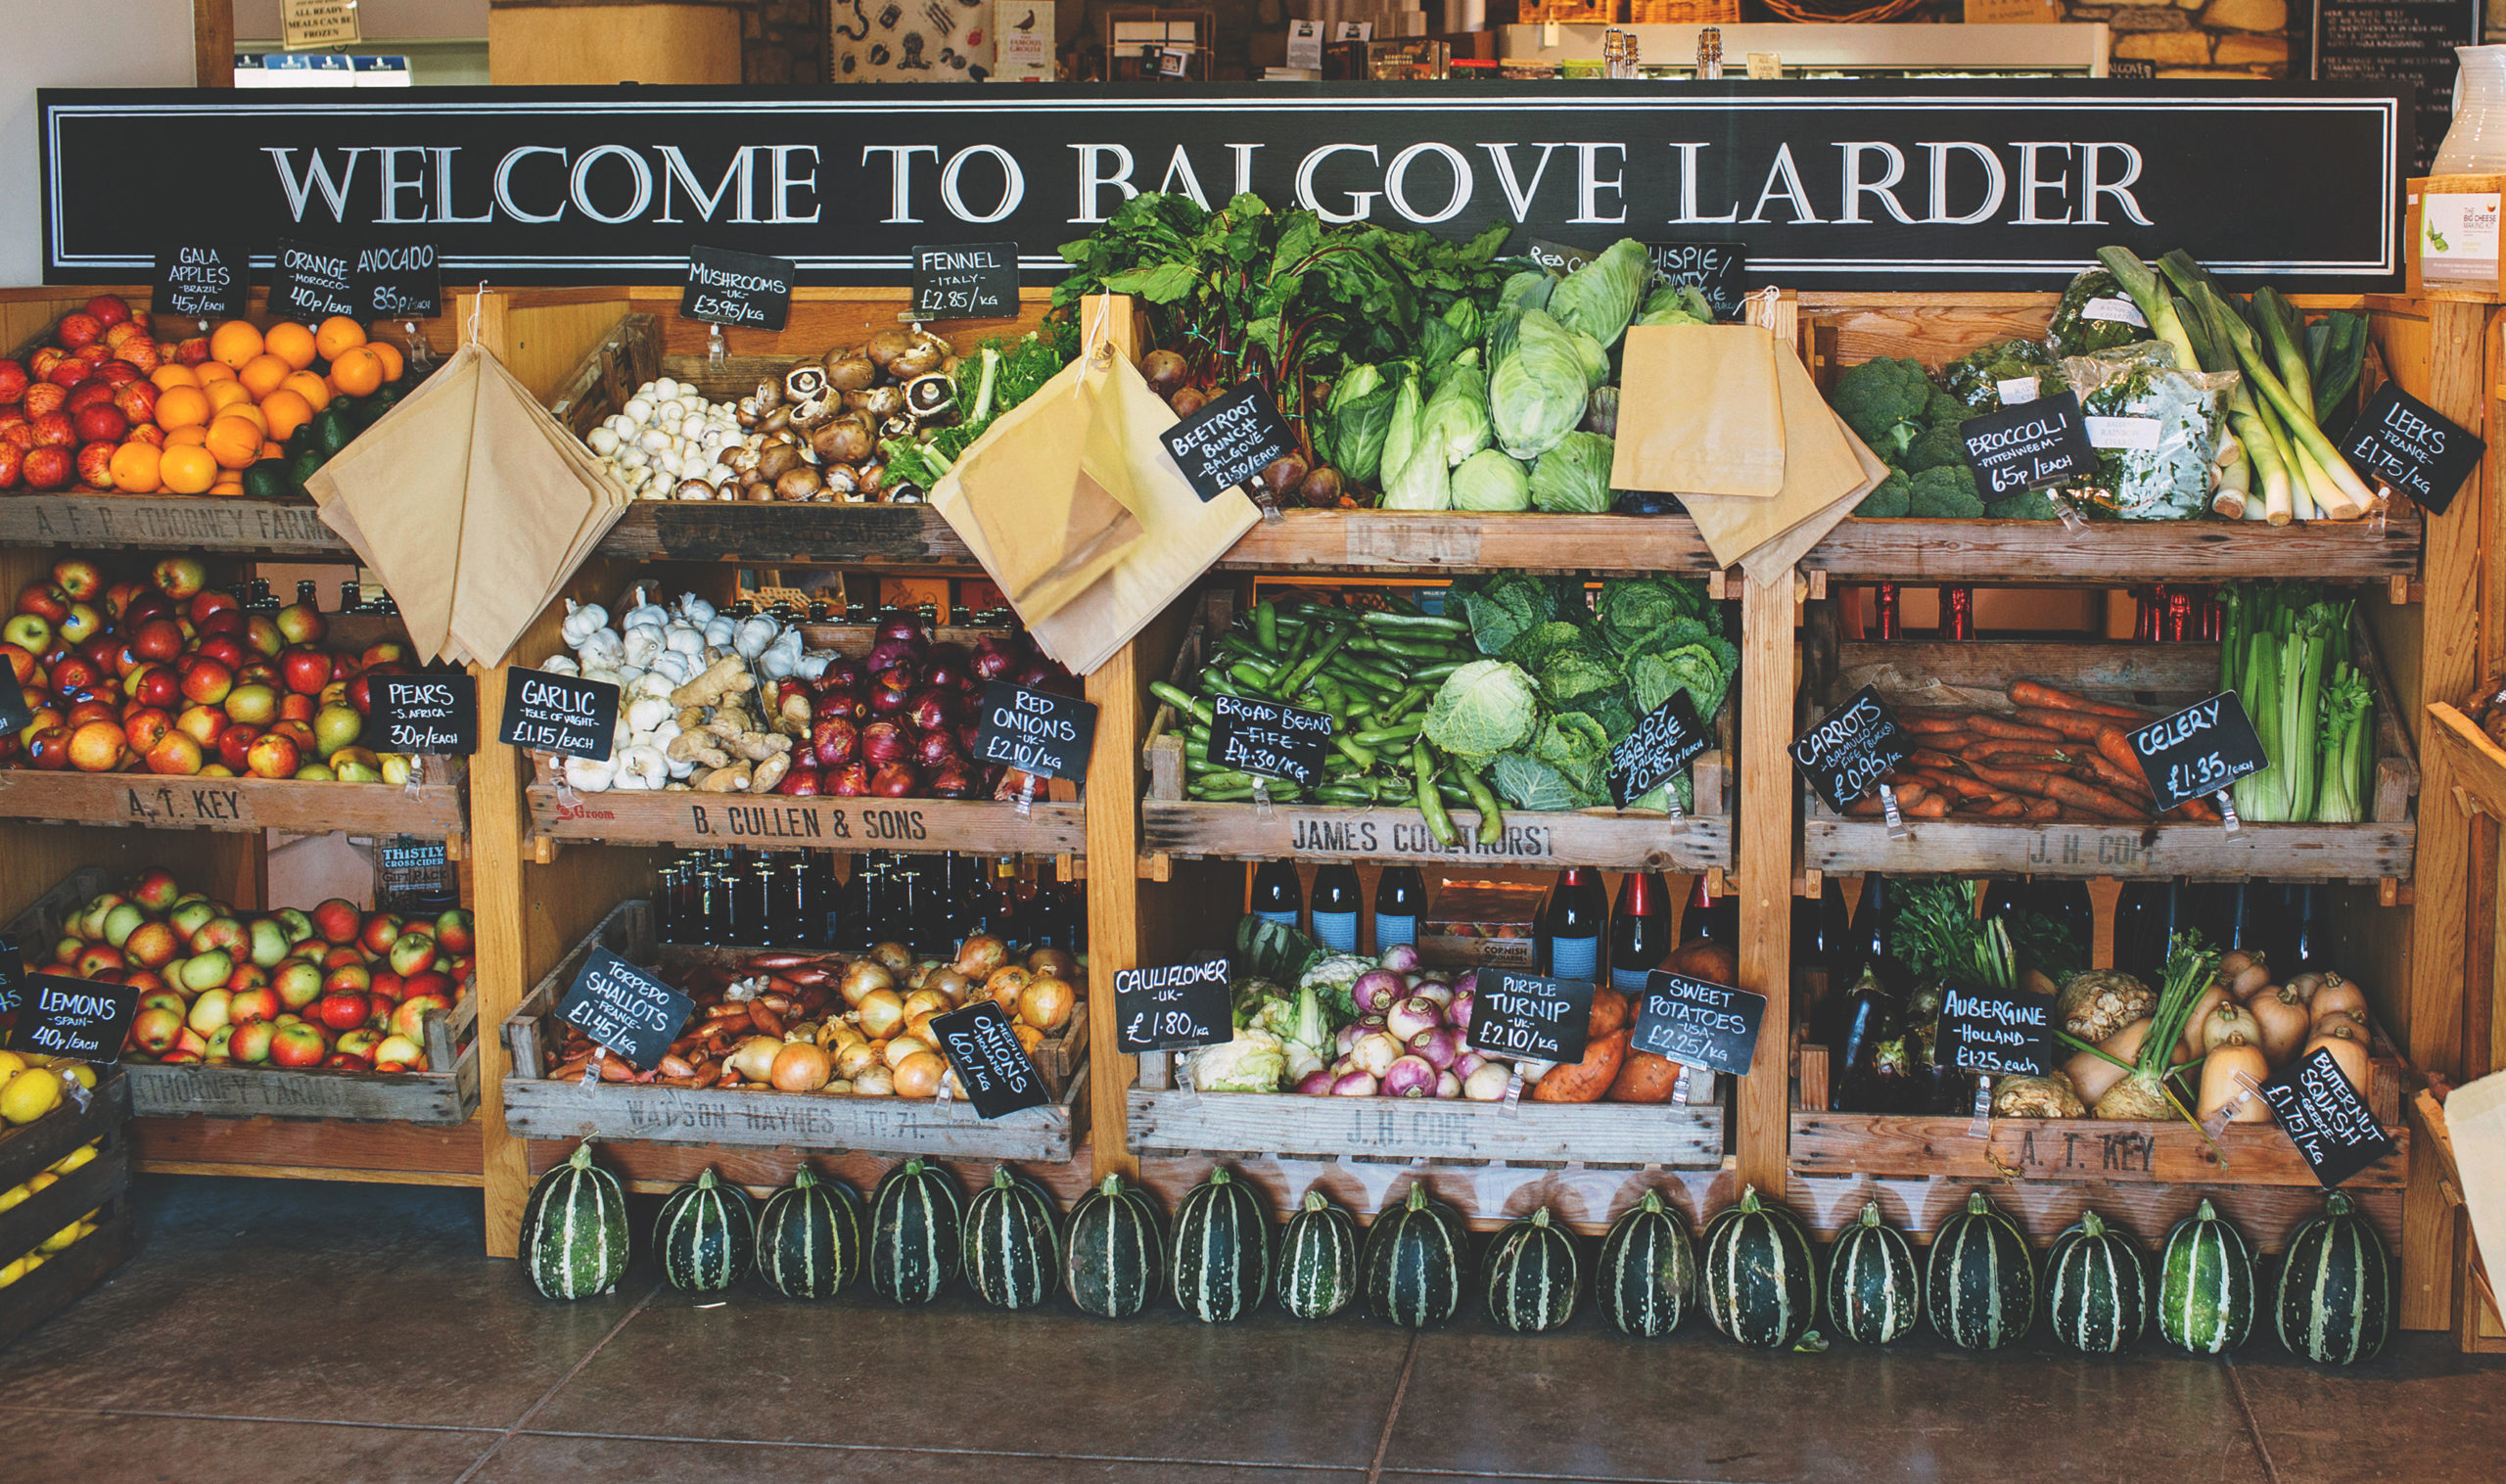 Balgove Larder is conquering deliveries, ensuring those self-isolating can get access to items they need